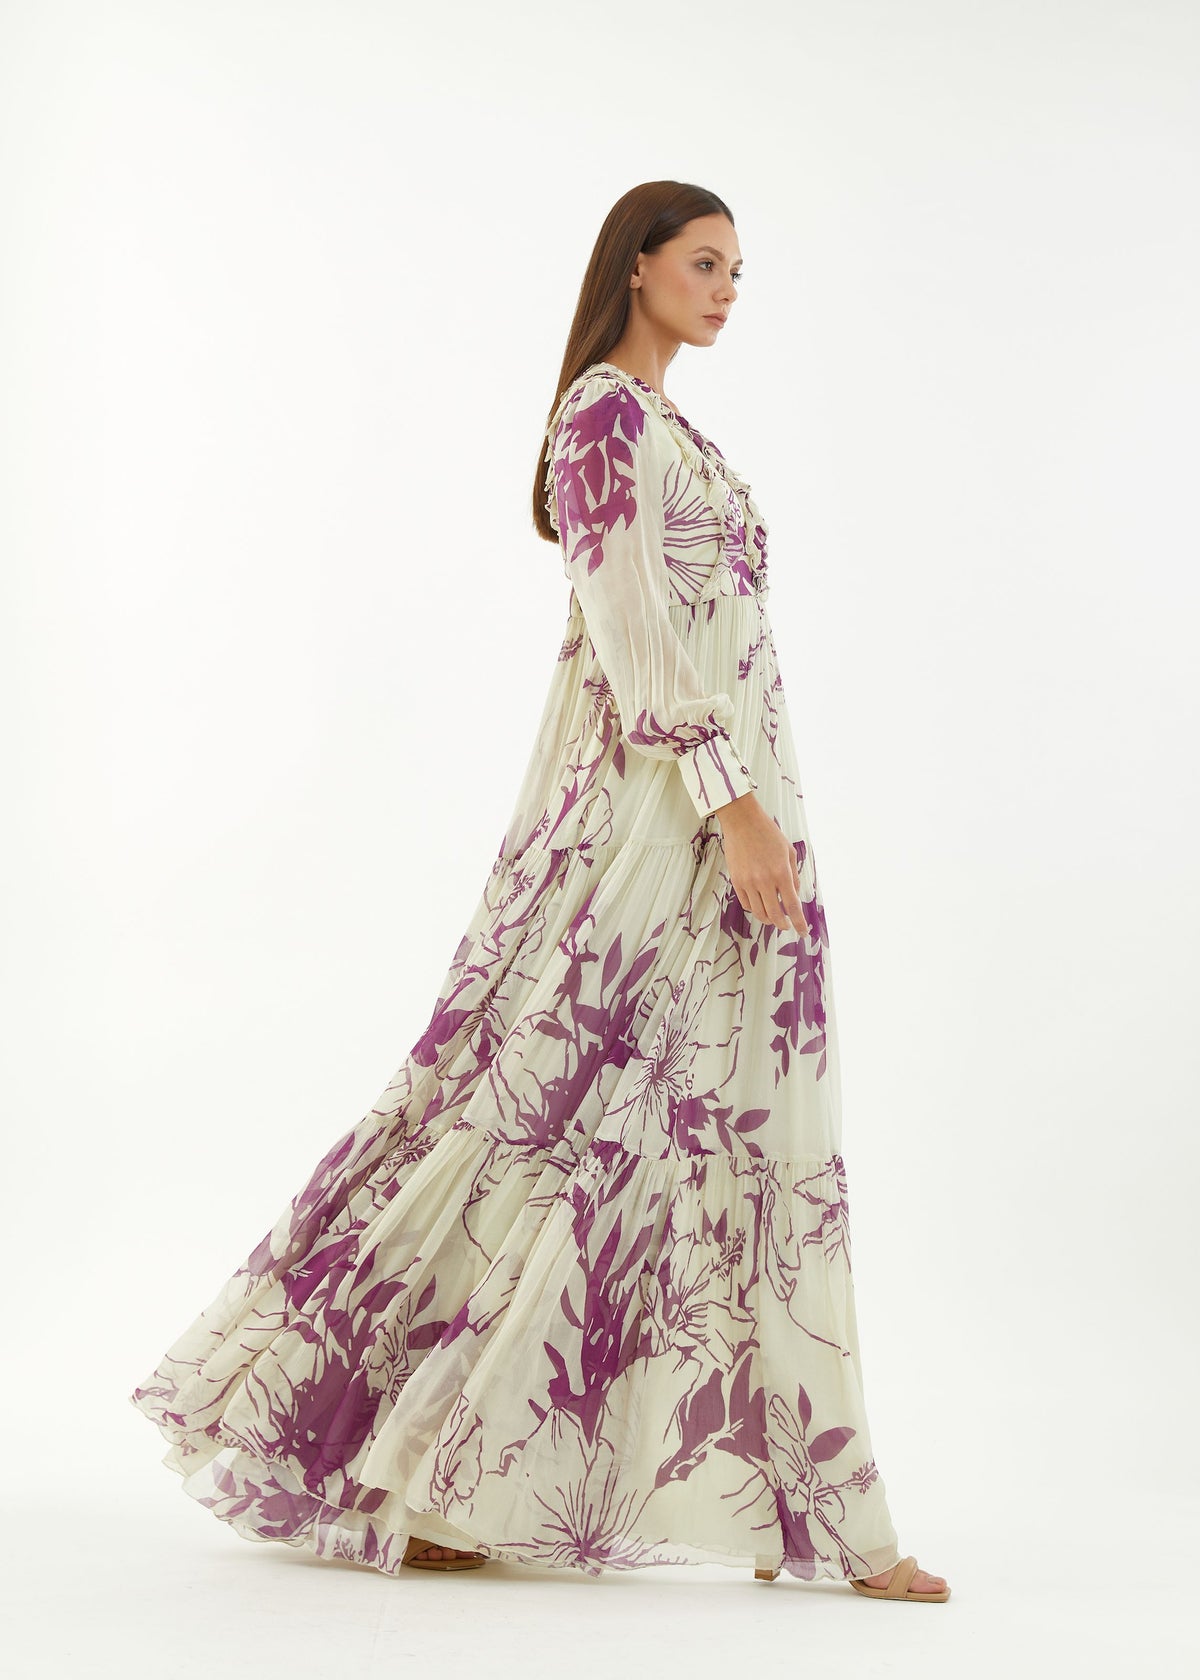 WHITE AND PURPLE FLORAL LONG DRESS